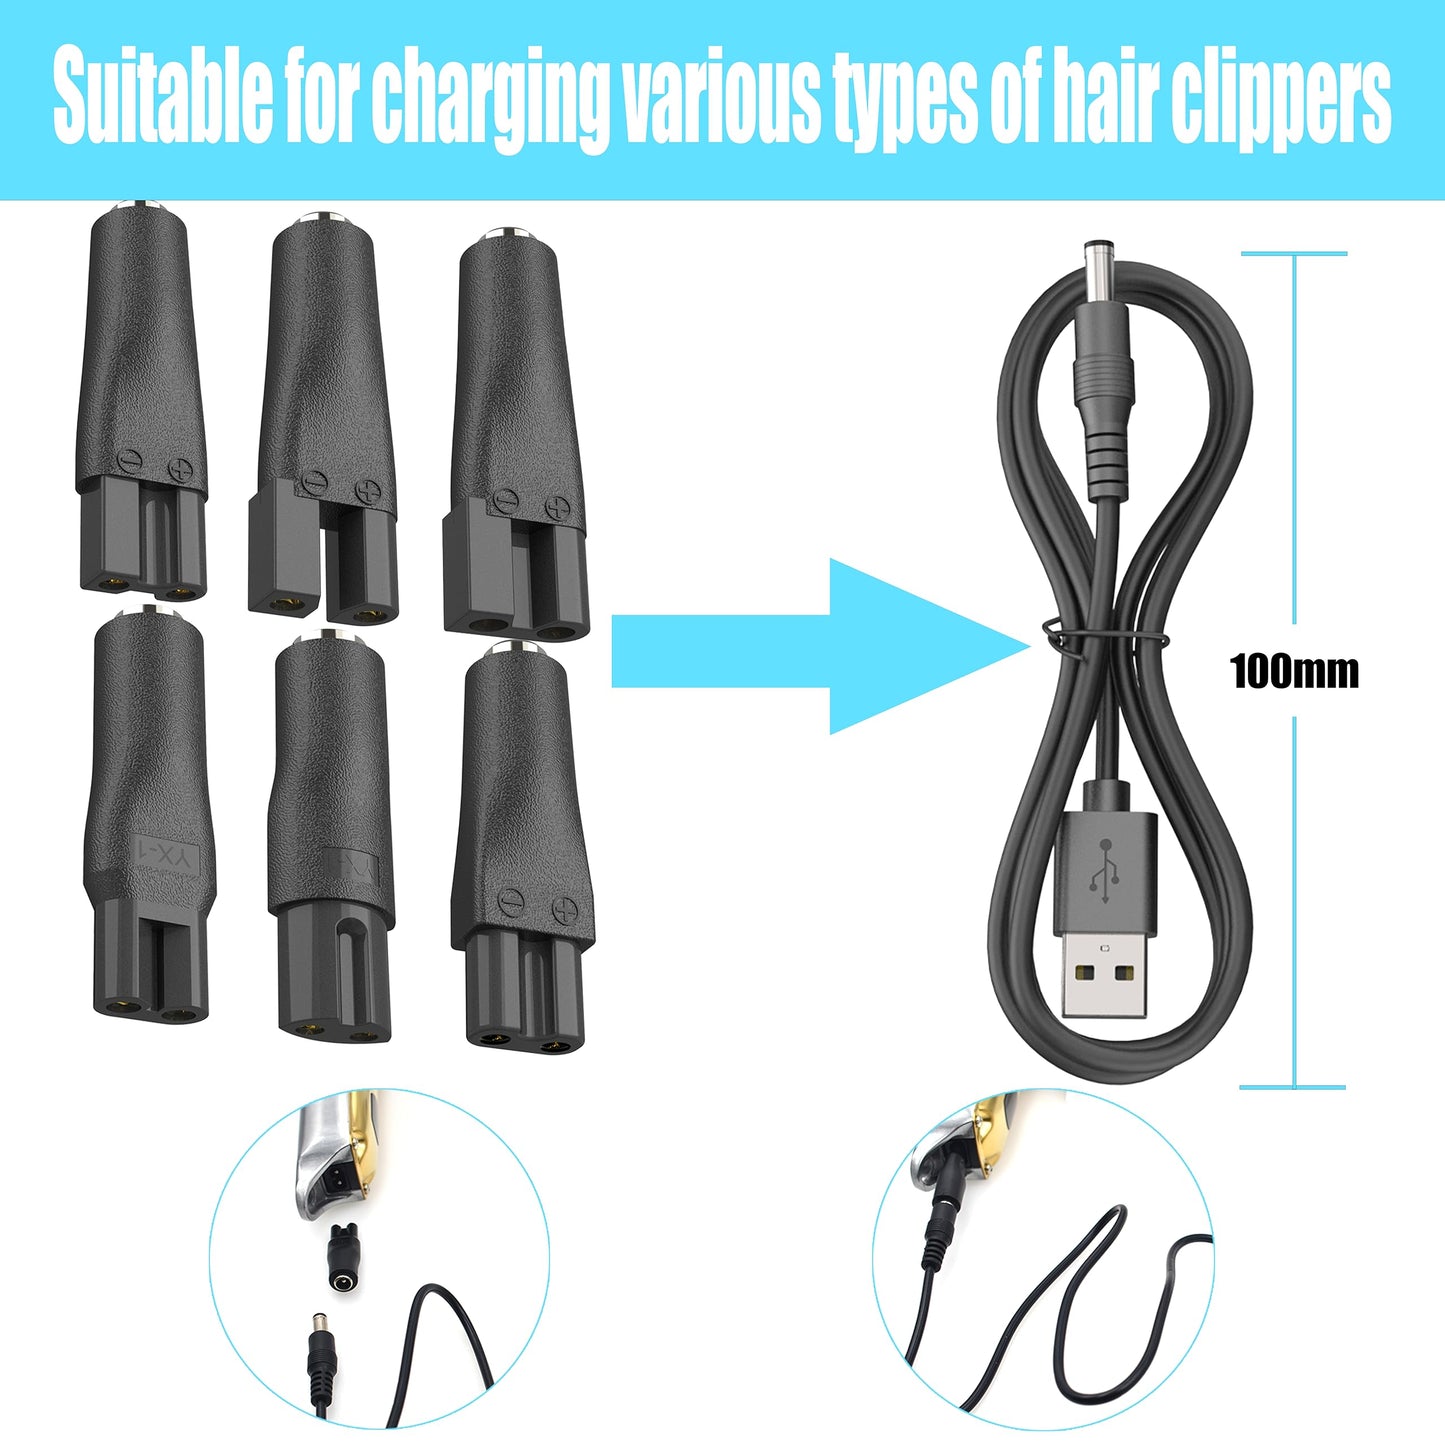 9 PCS 5V Replacement Charger USB Power Cord Adapter Compatible with Various Types of Hair Clippers, Beard Trimmers, Shavers, Beauty Instruments,Electric Hairdressers, Desk Lamps,HQ8505 Charging Cable